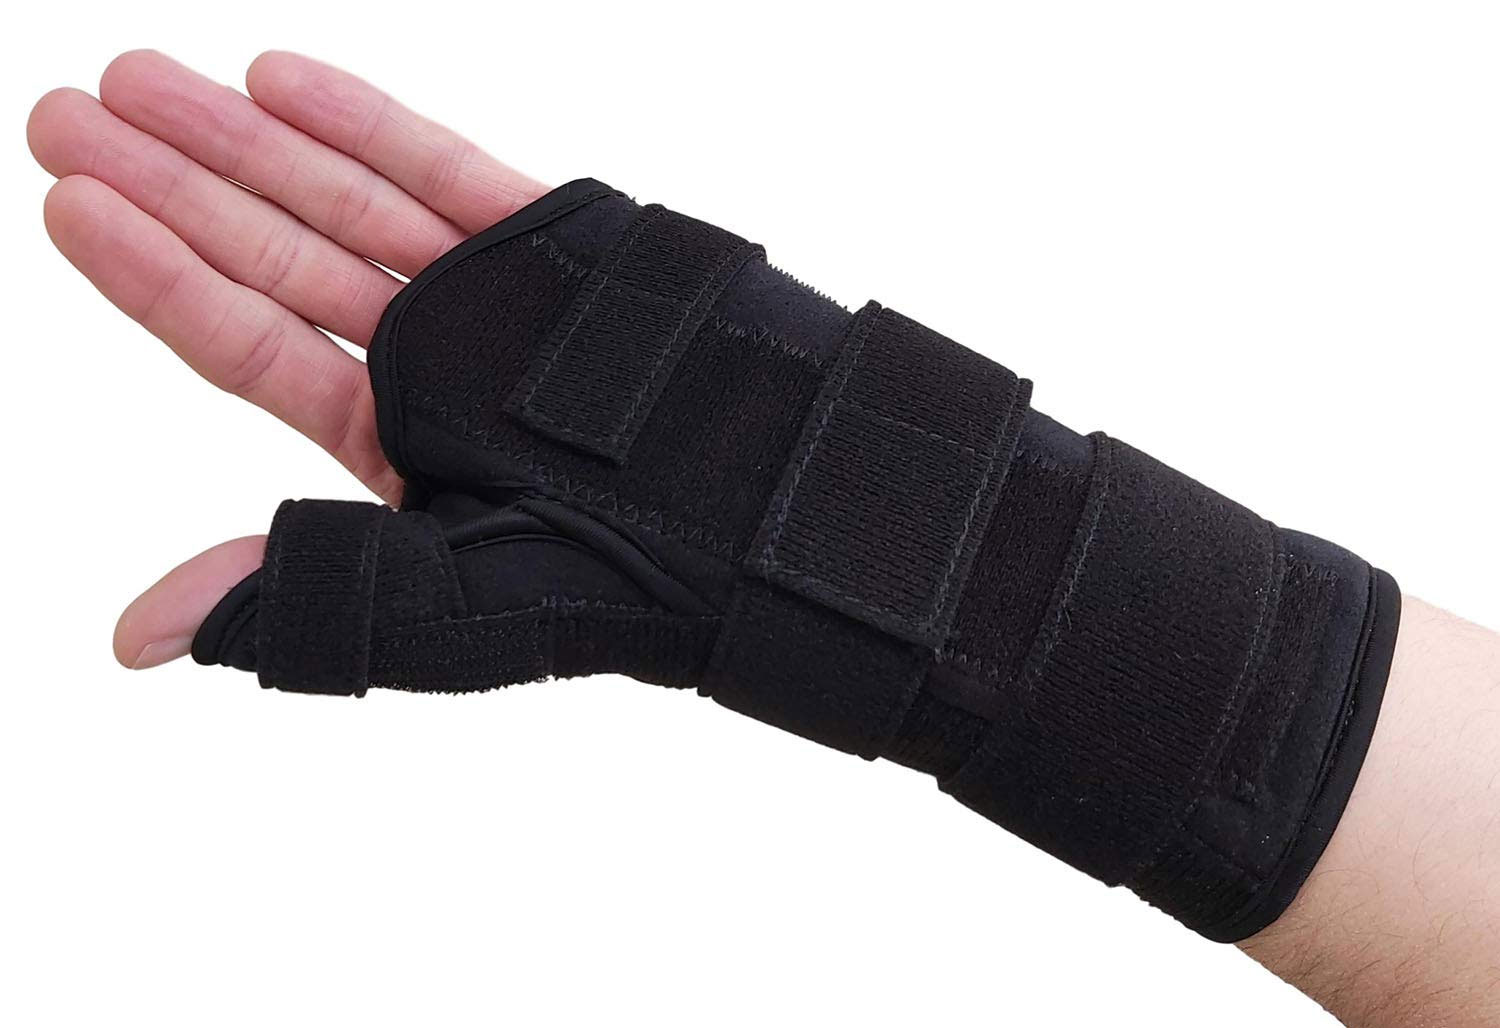 What is a Thumb Spica Splint Used For?